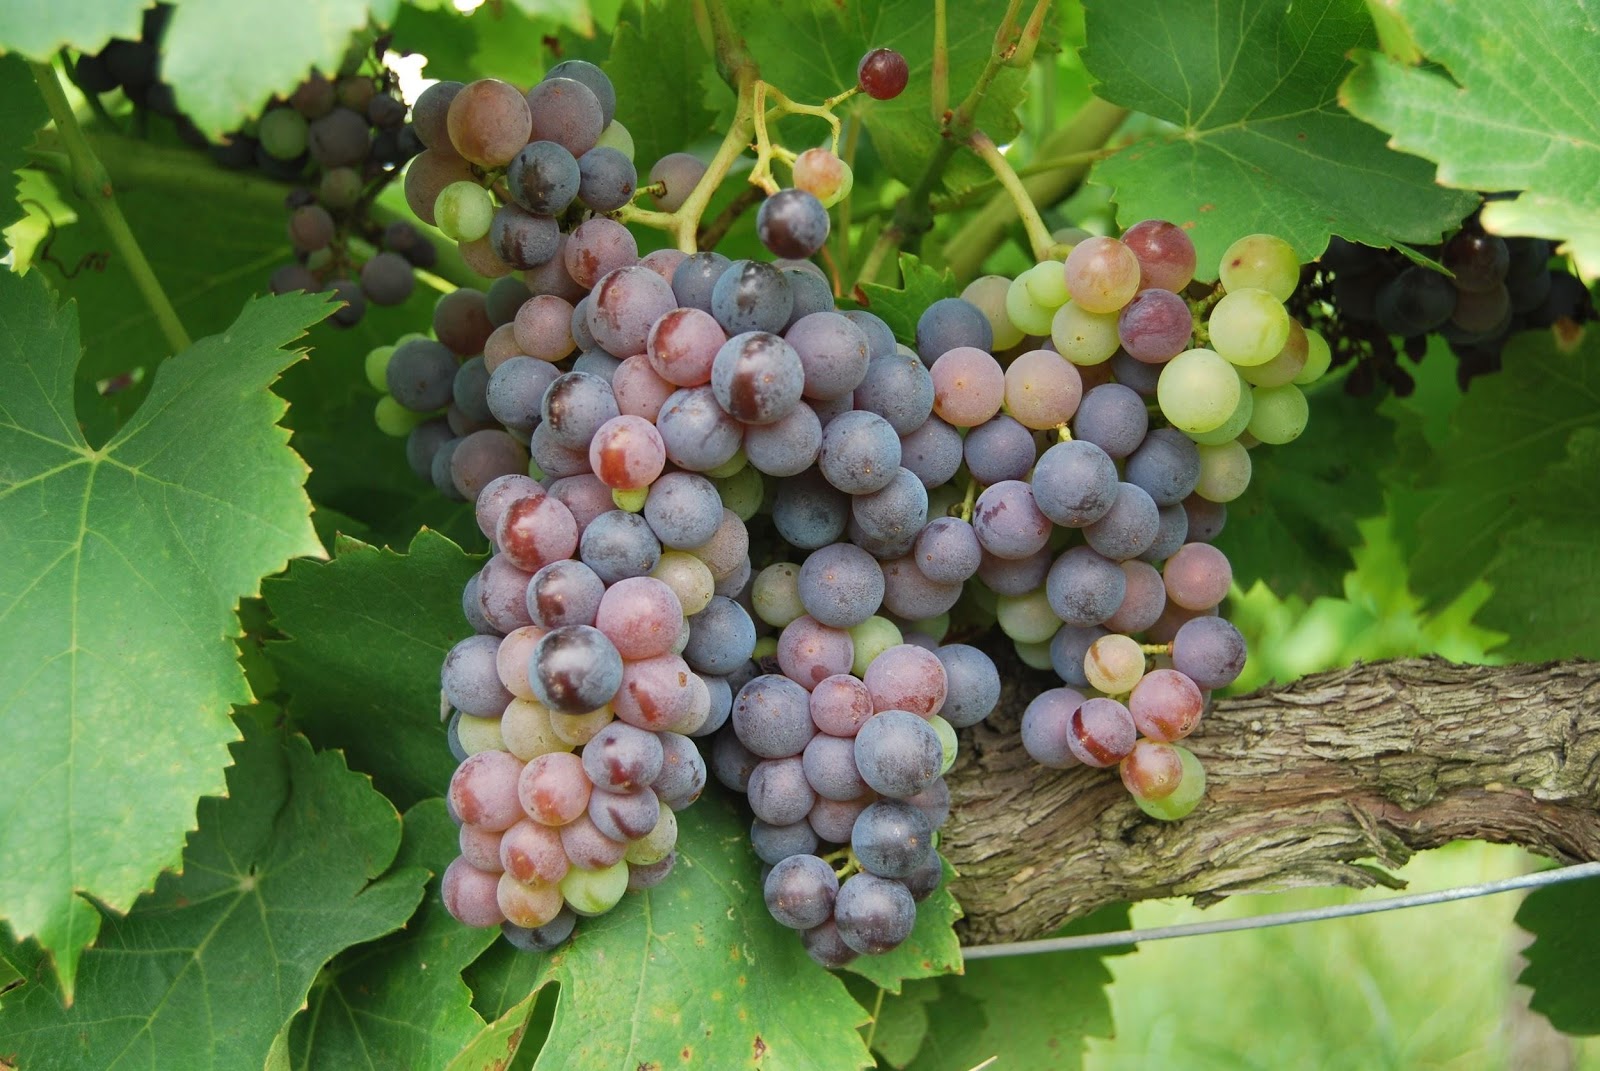 how do viticulturists grow grapes without seeds and where do seedless grapes come from